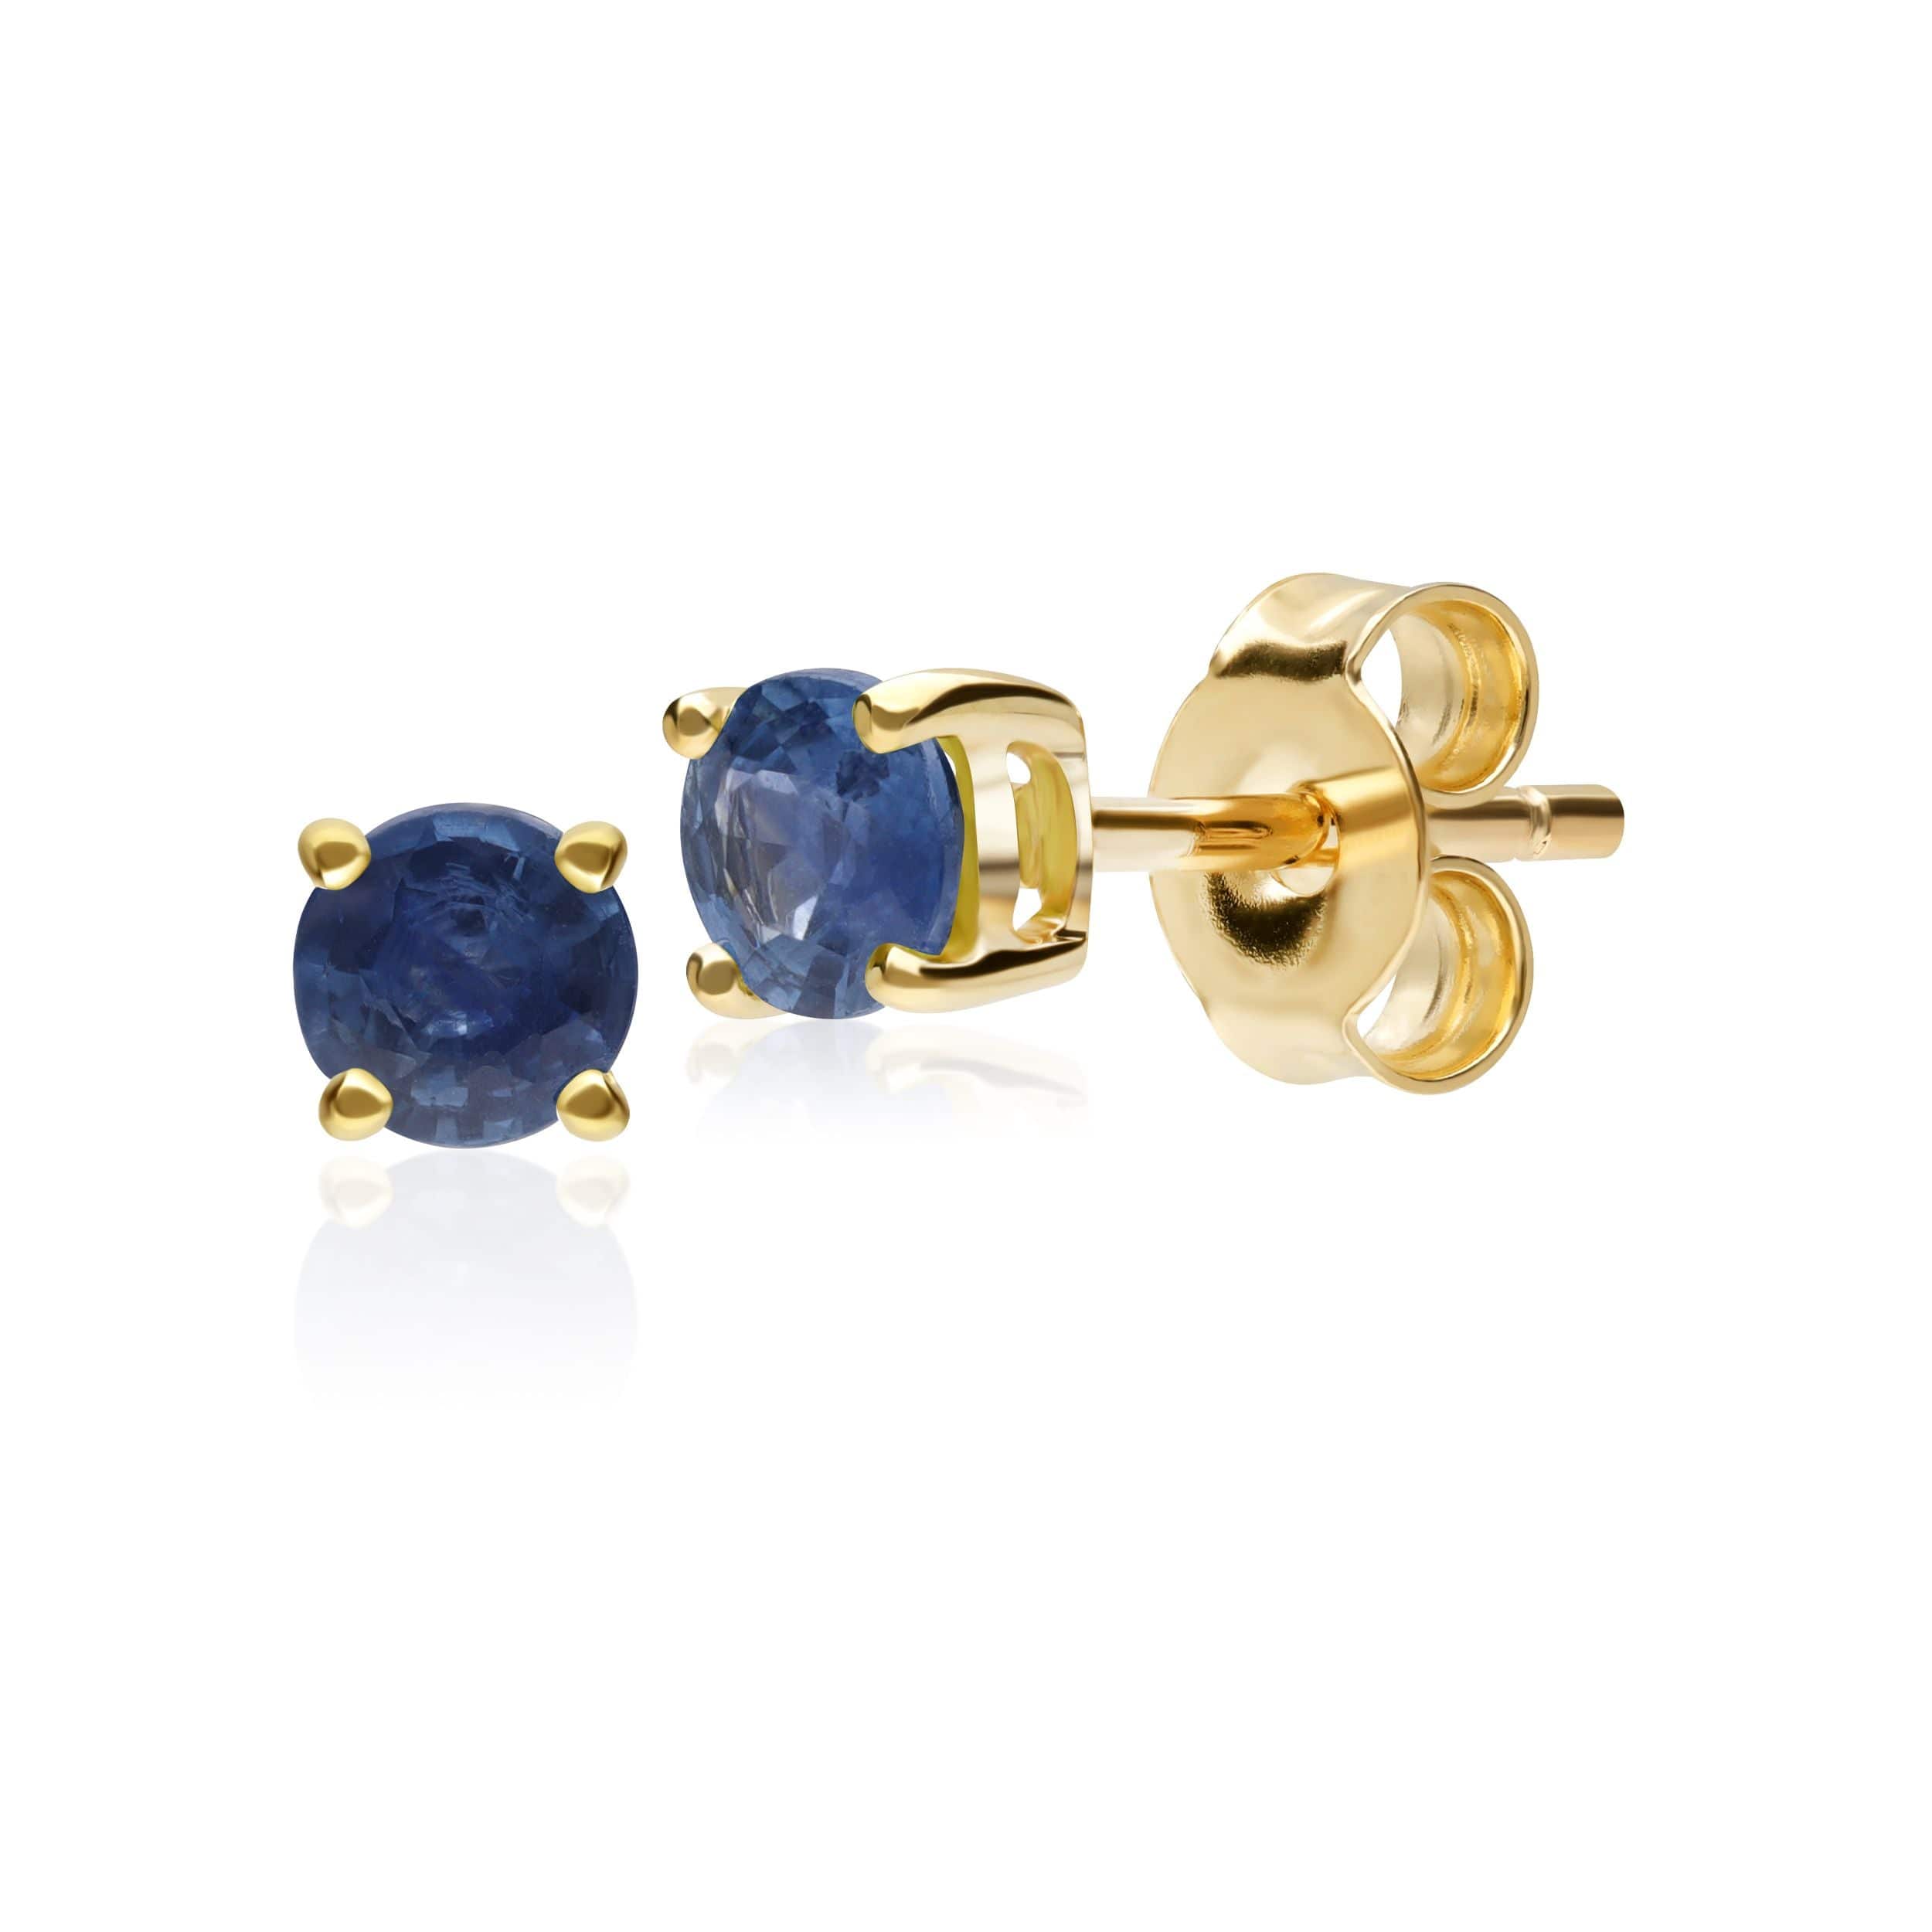 11559 Classic Round Sapphire Stud Earrings in 9ct Yellow Gold 3.5mm 1